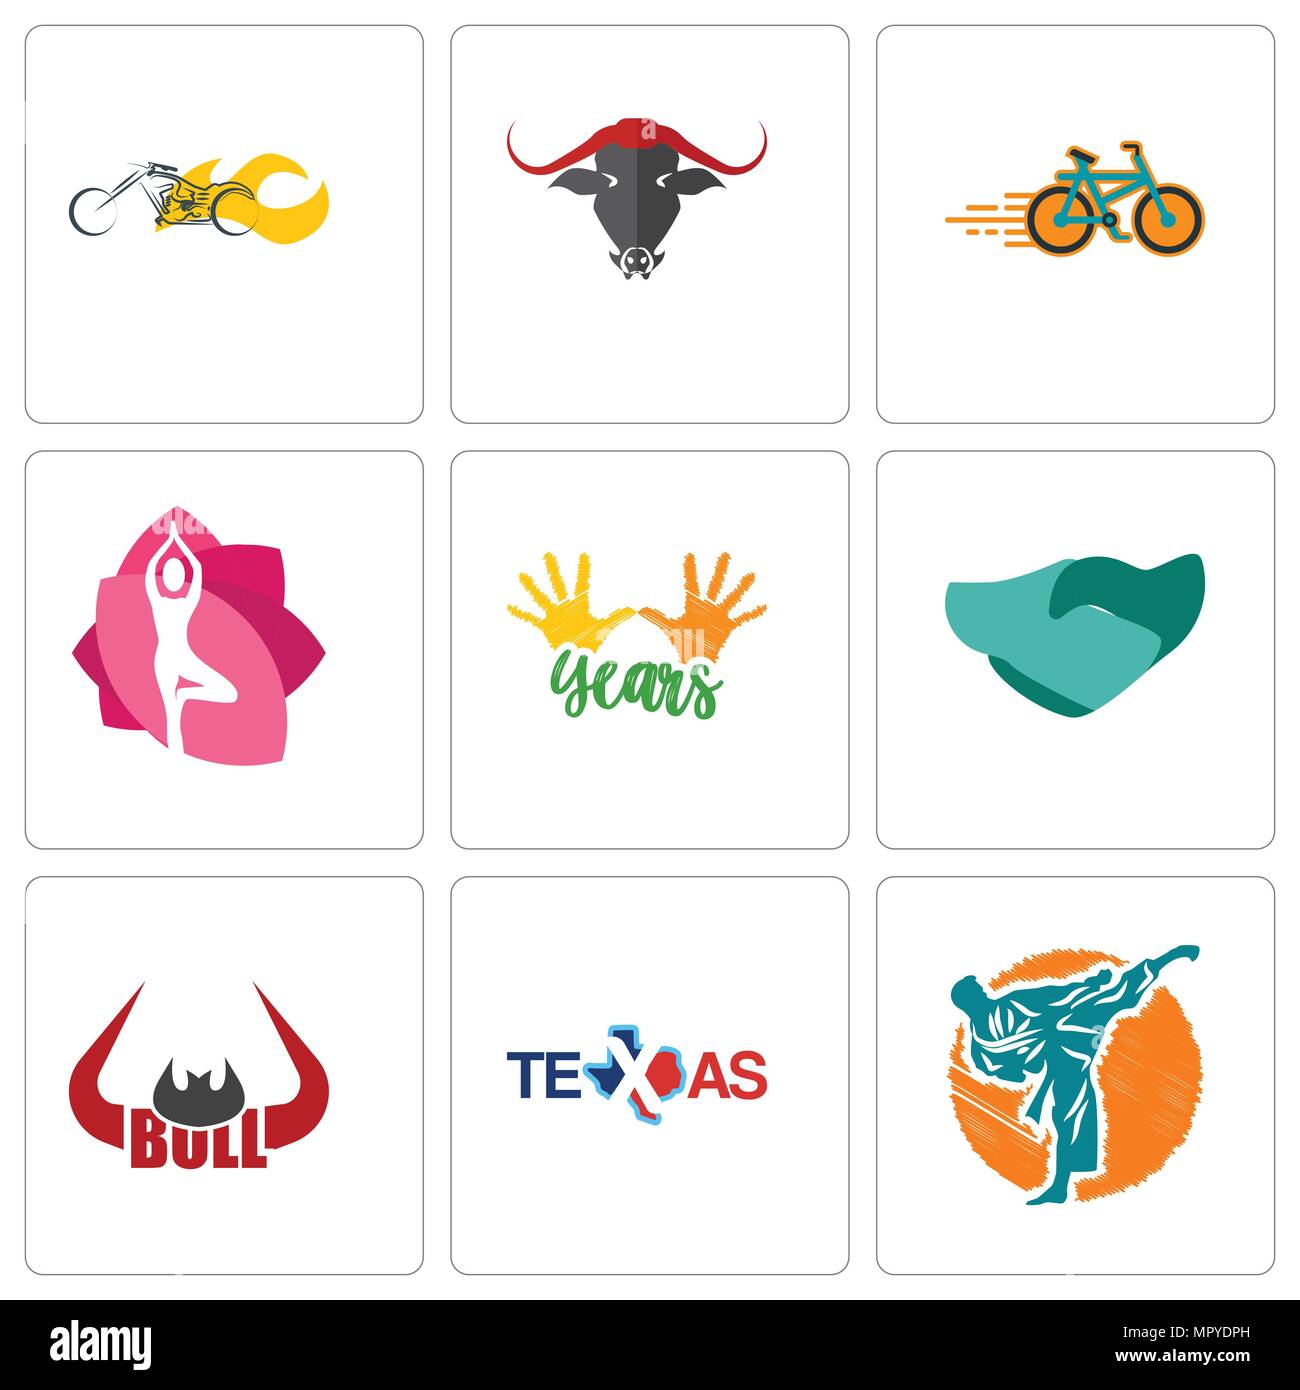 Set Of 9 simple editable icons such as martial arts, texas, bull horn, hand shaking, 10 years, yoga studio, bike shop, chopper, can be used for mobile Stock Vector